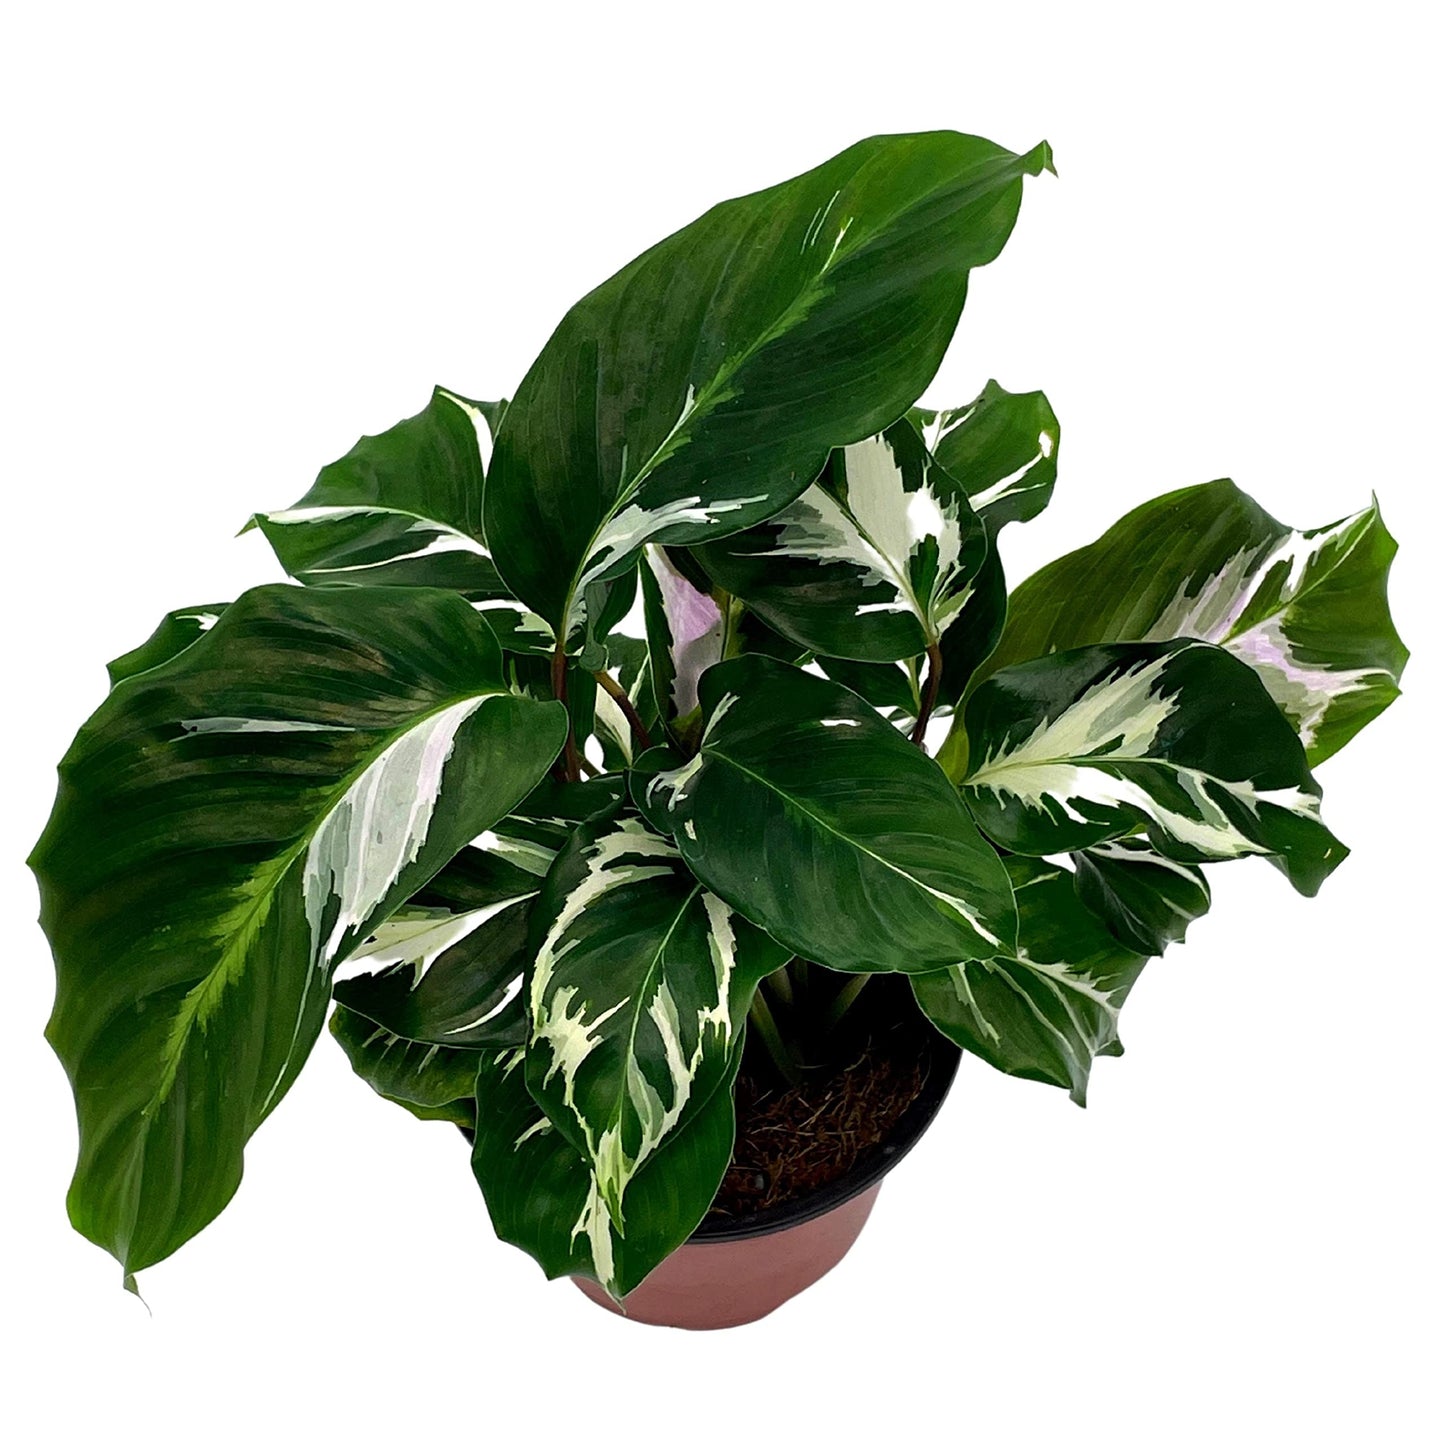 Calathea White Fusion, 4 inch, Rare Variegated Prayer Plant, Cathedral Plant, Green and White